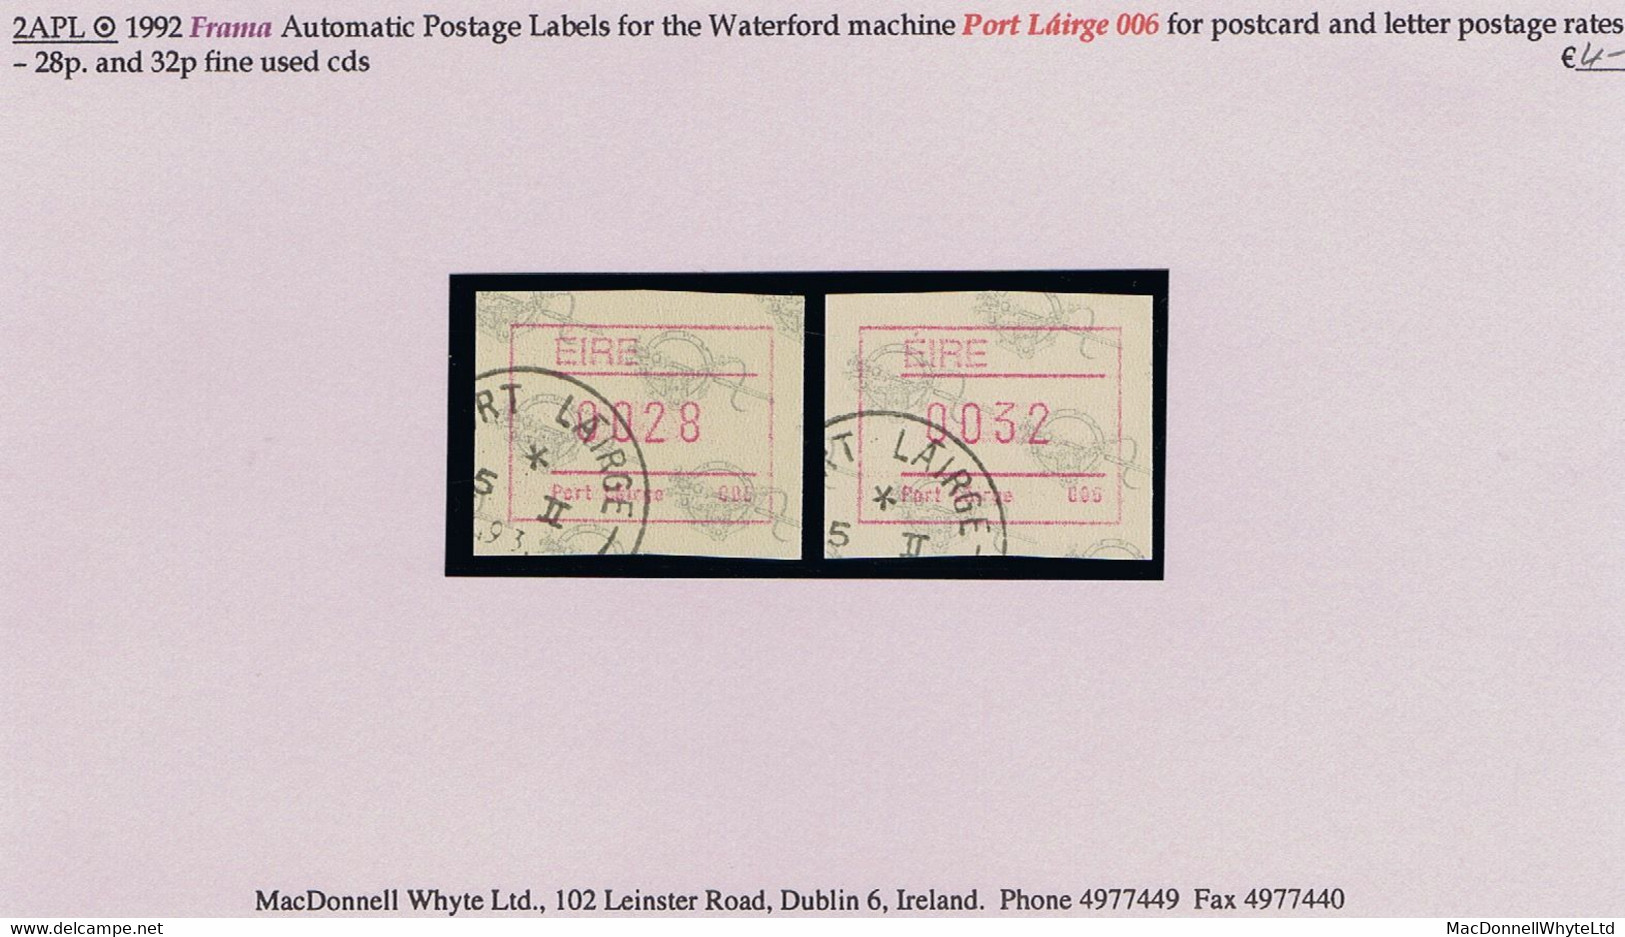 Ireland 1992 Frama Automatic Postage Labels For Waterford 006 Machine 28p Postcard Rate And 32p Letter Rate Fine Used - Automatenmarken (Frama)